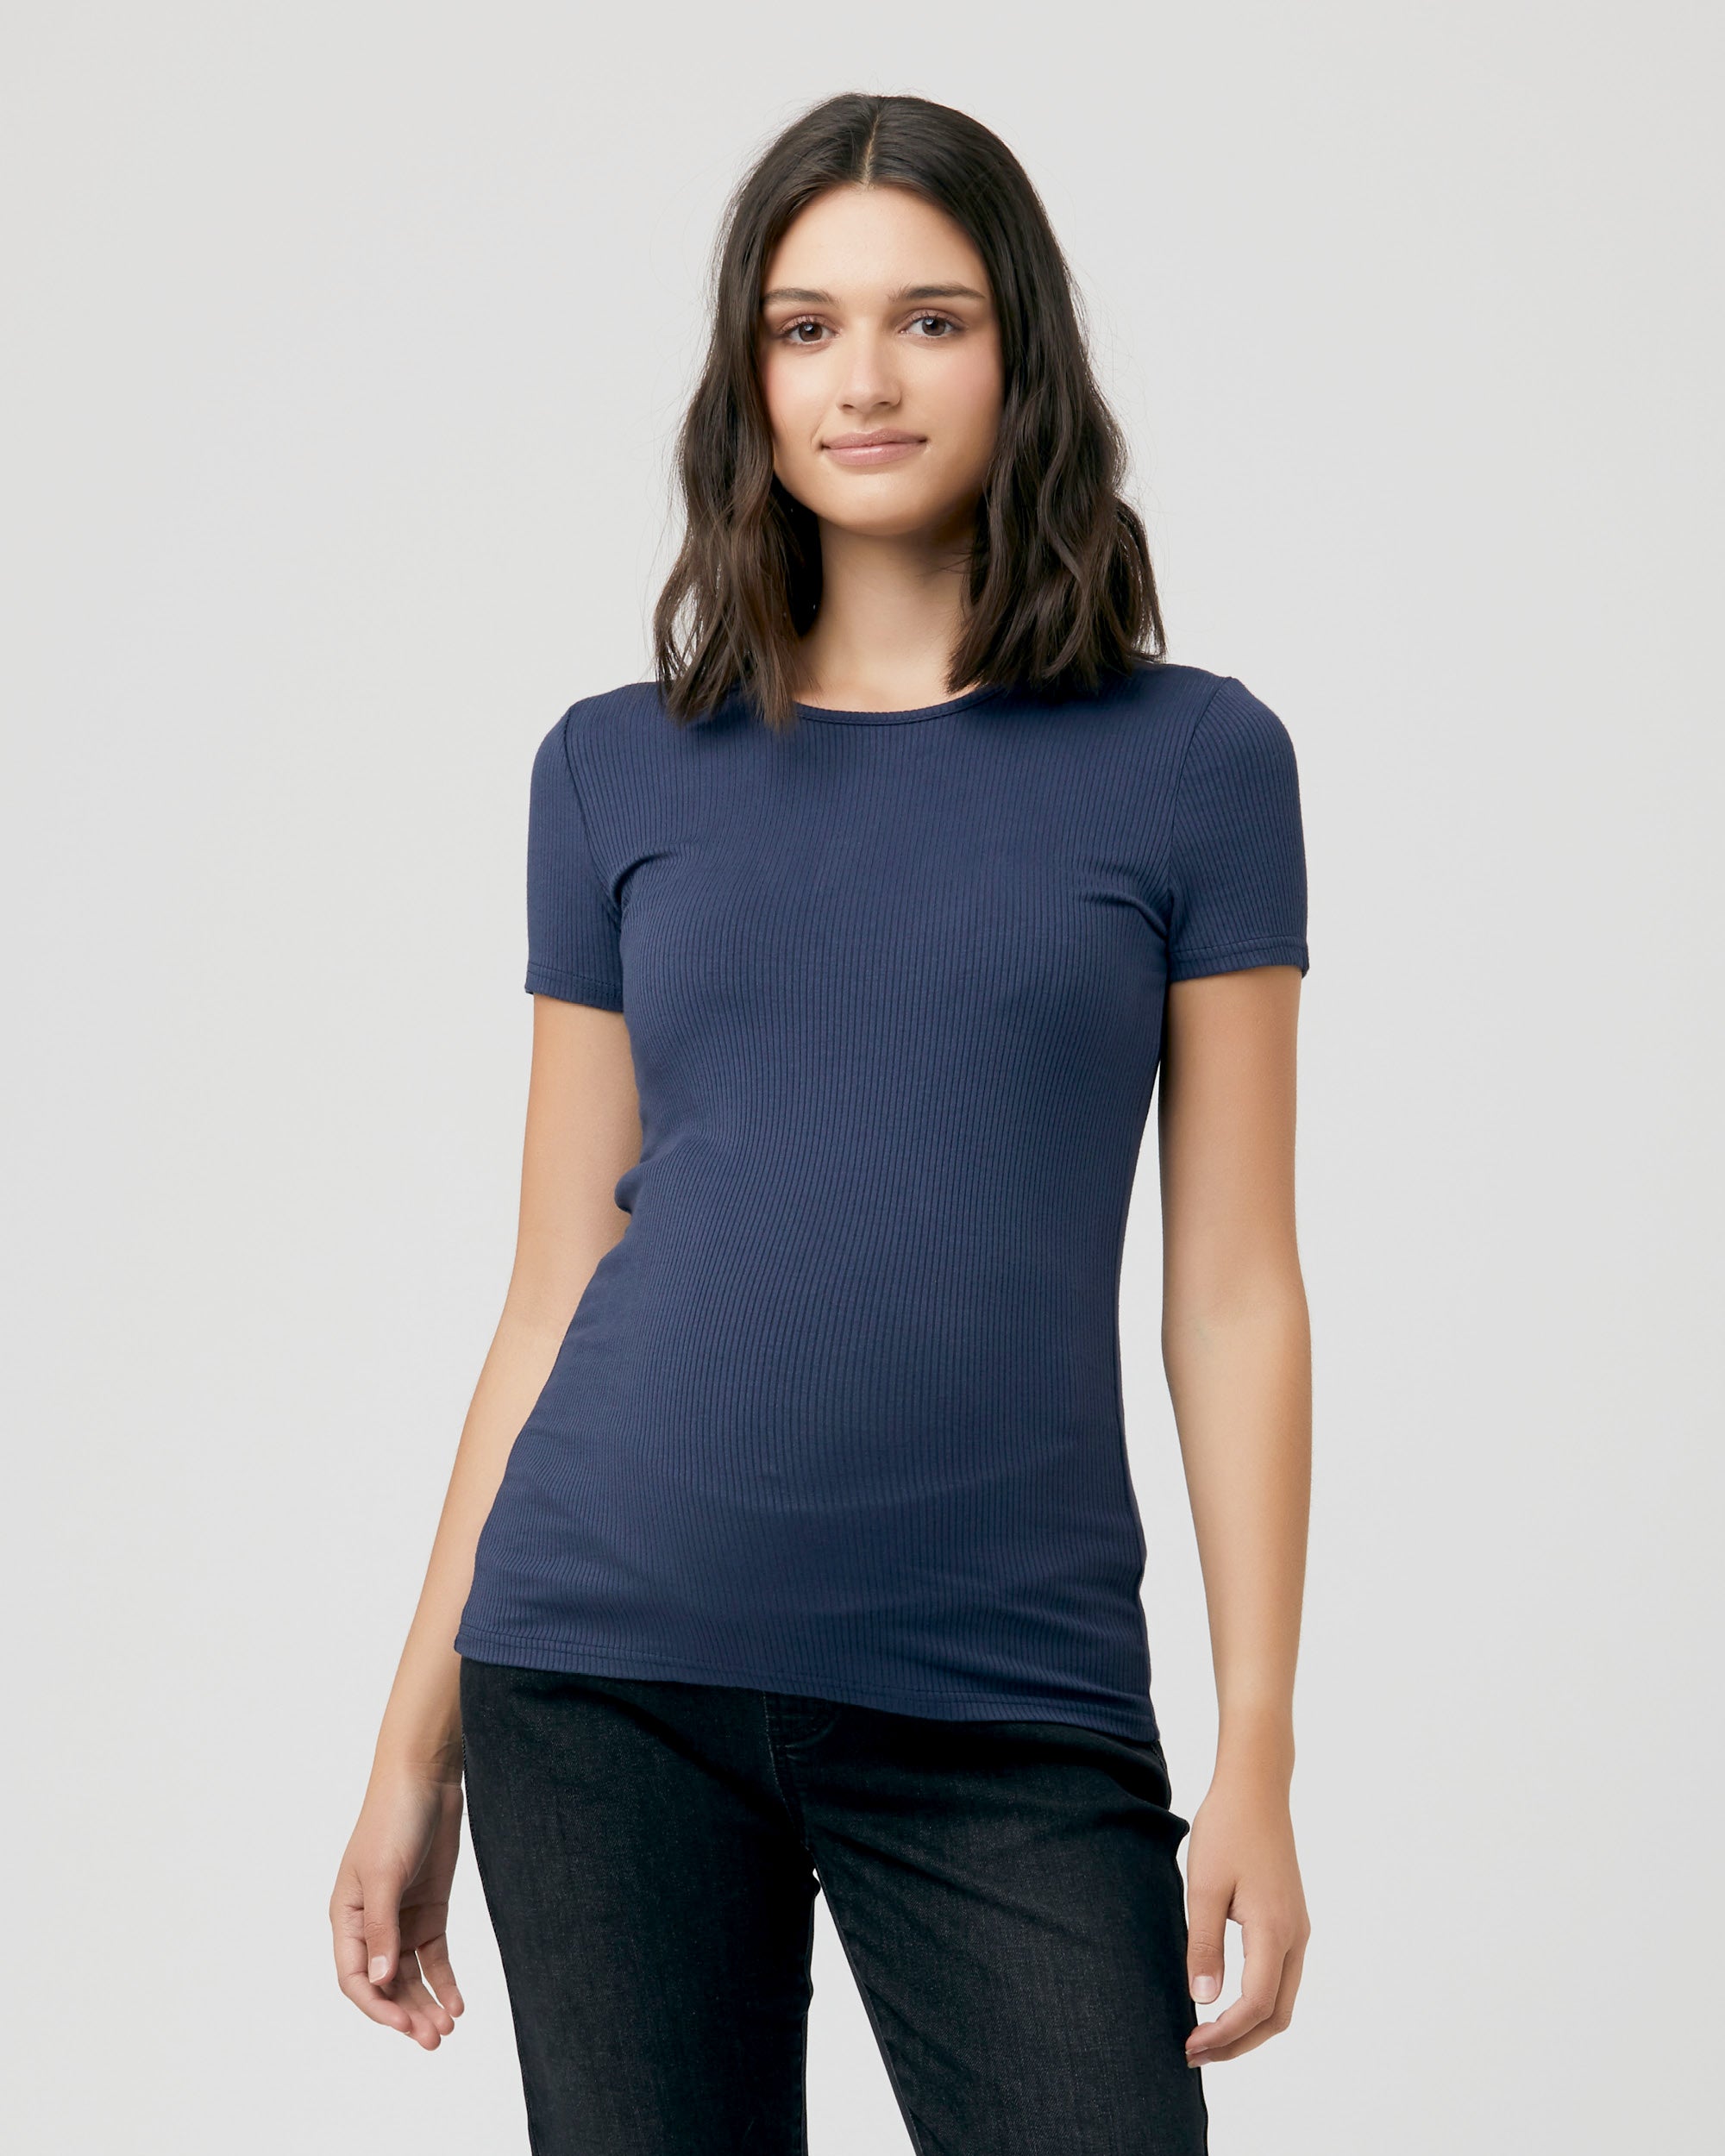 Short Sleeve Round About Tee Navy